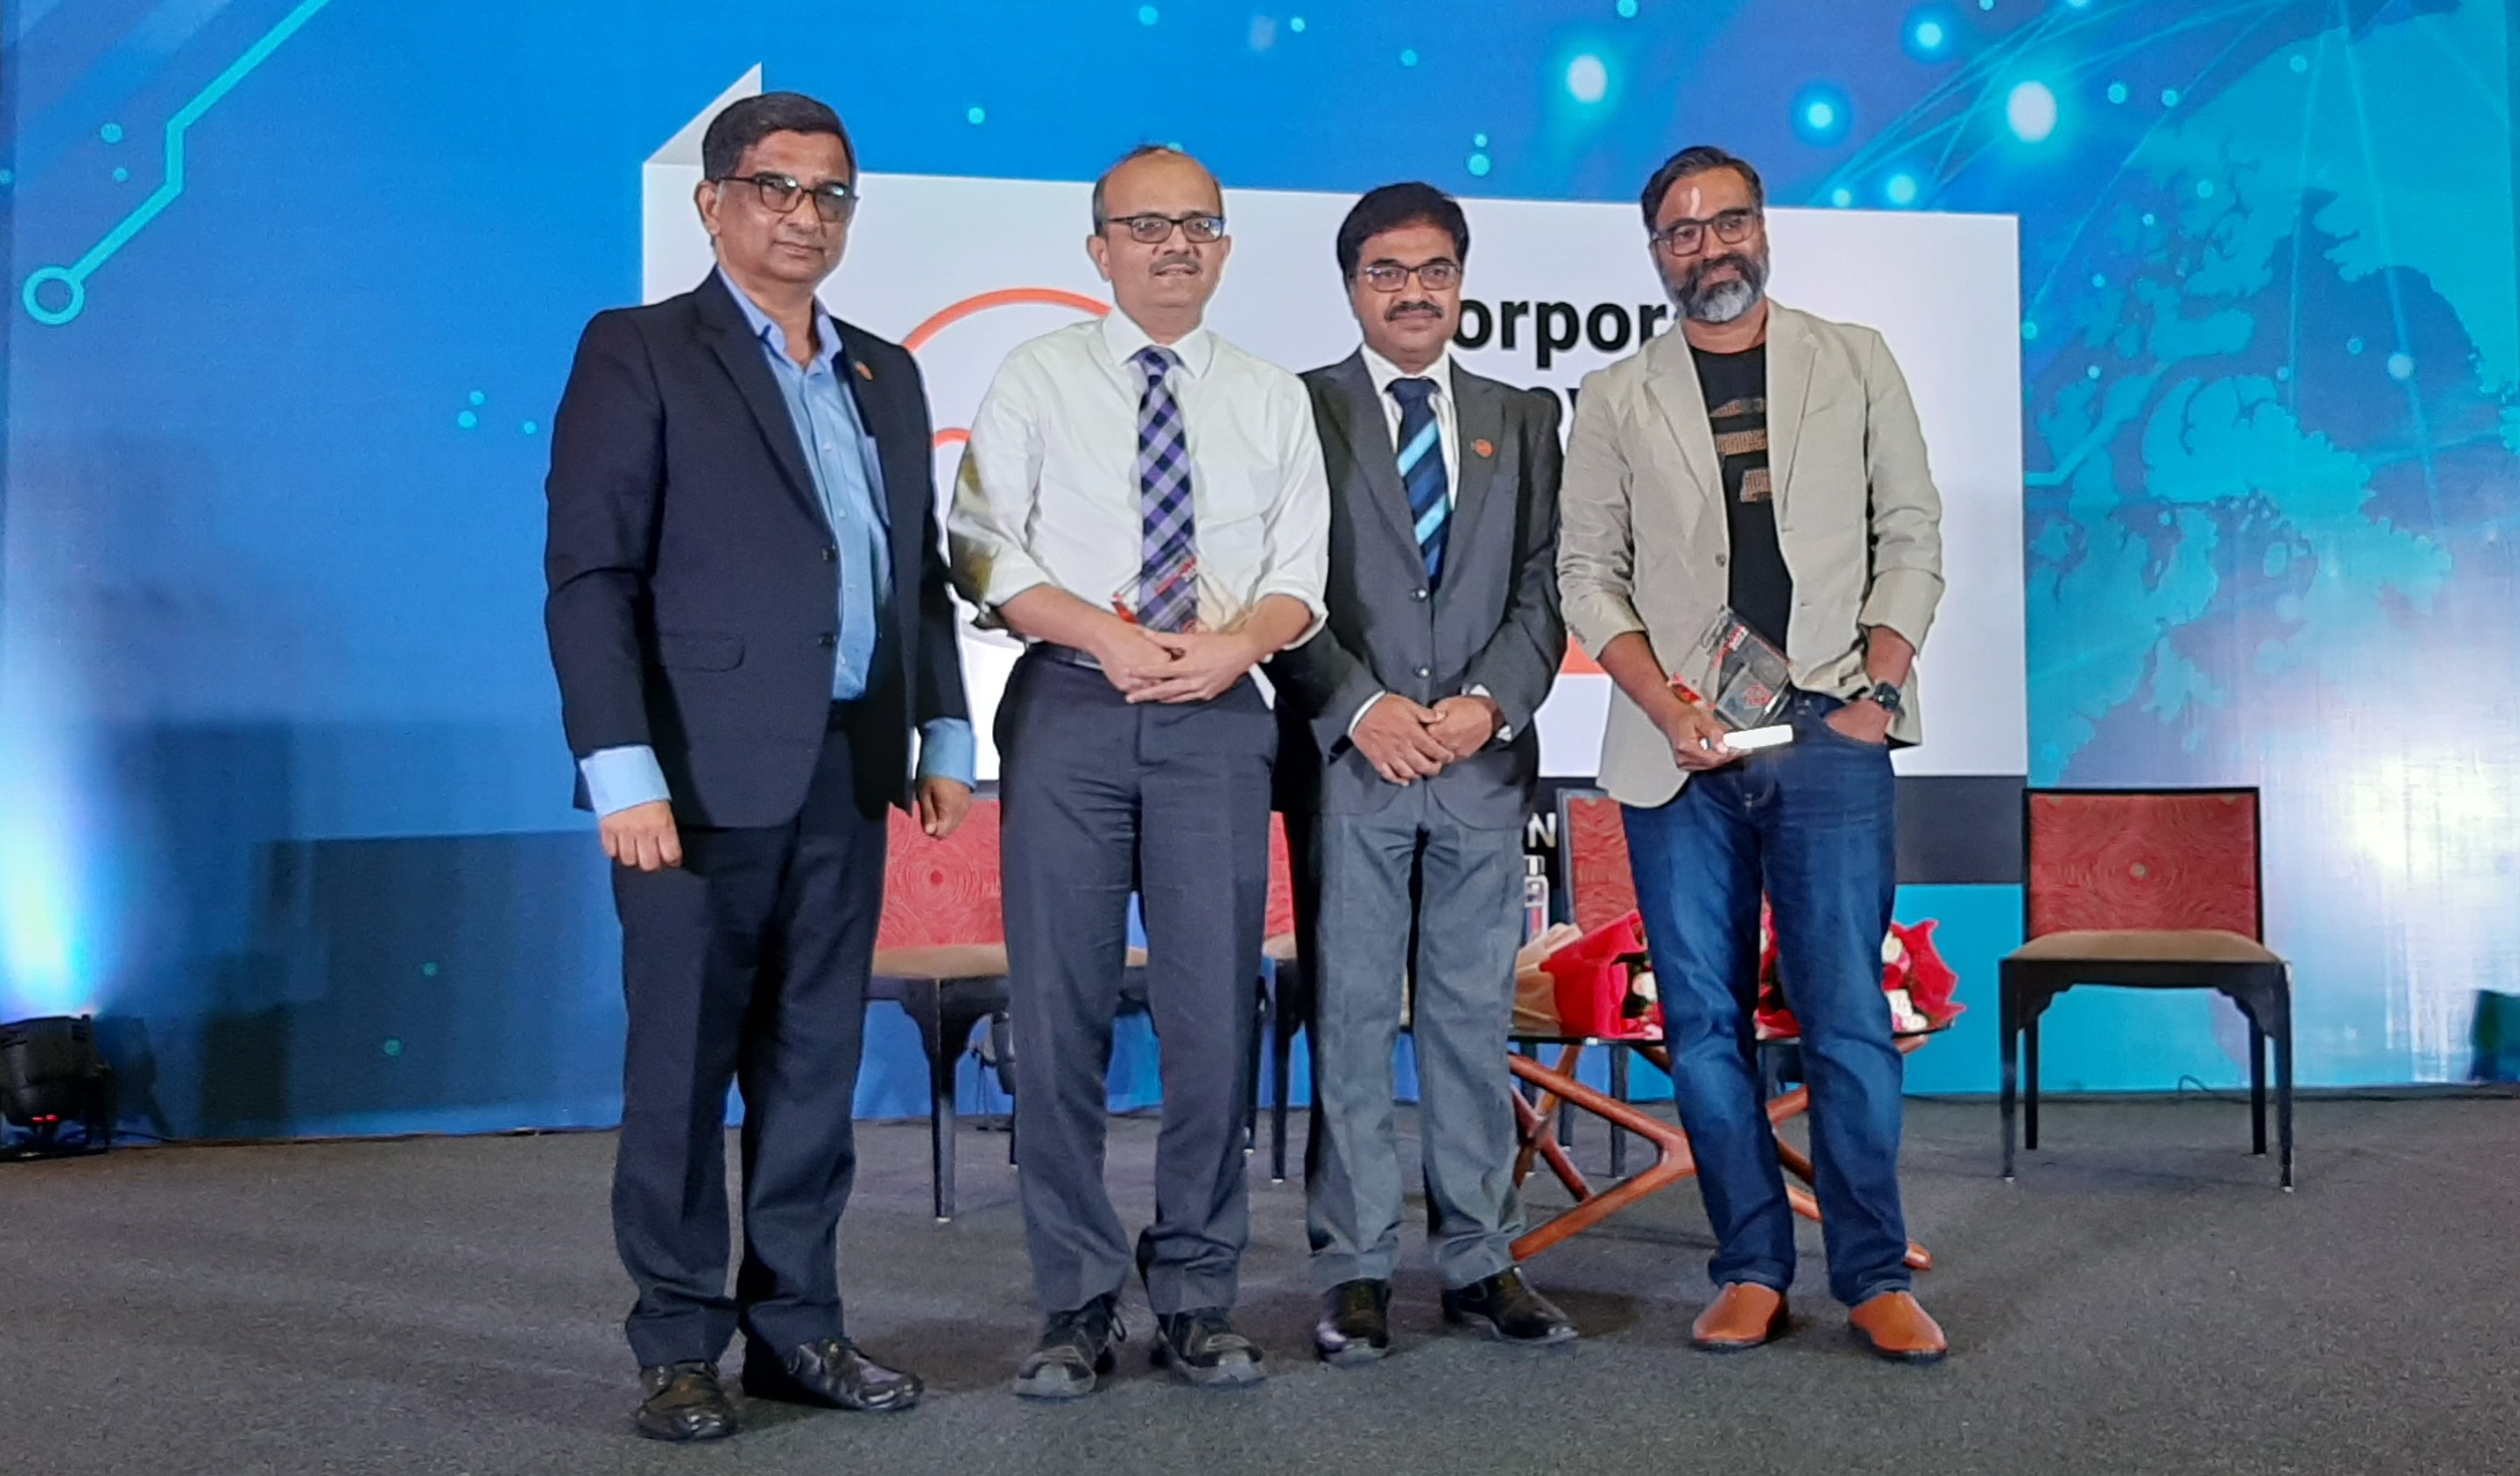 T-Hub's Corporate Innovation Conclave Sparks Collaboration to Promote Open Innovation in Corporates